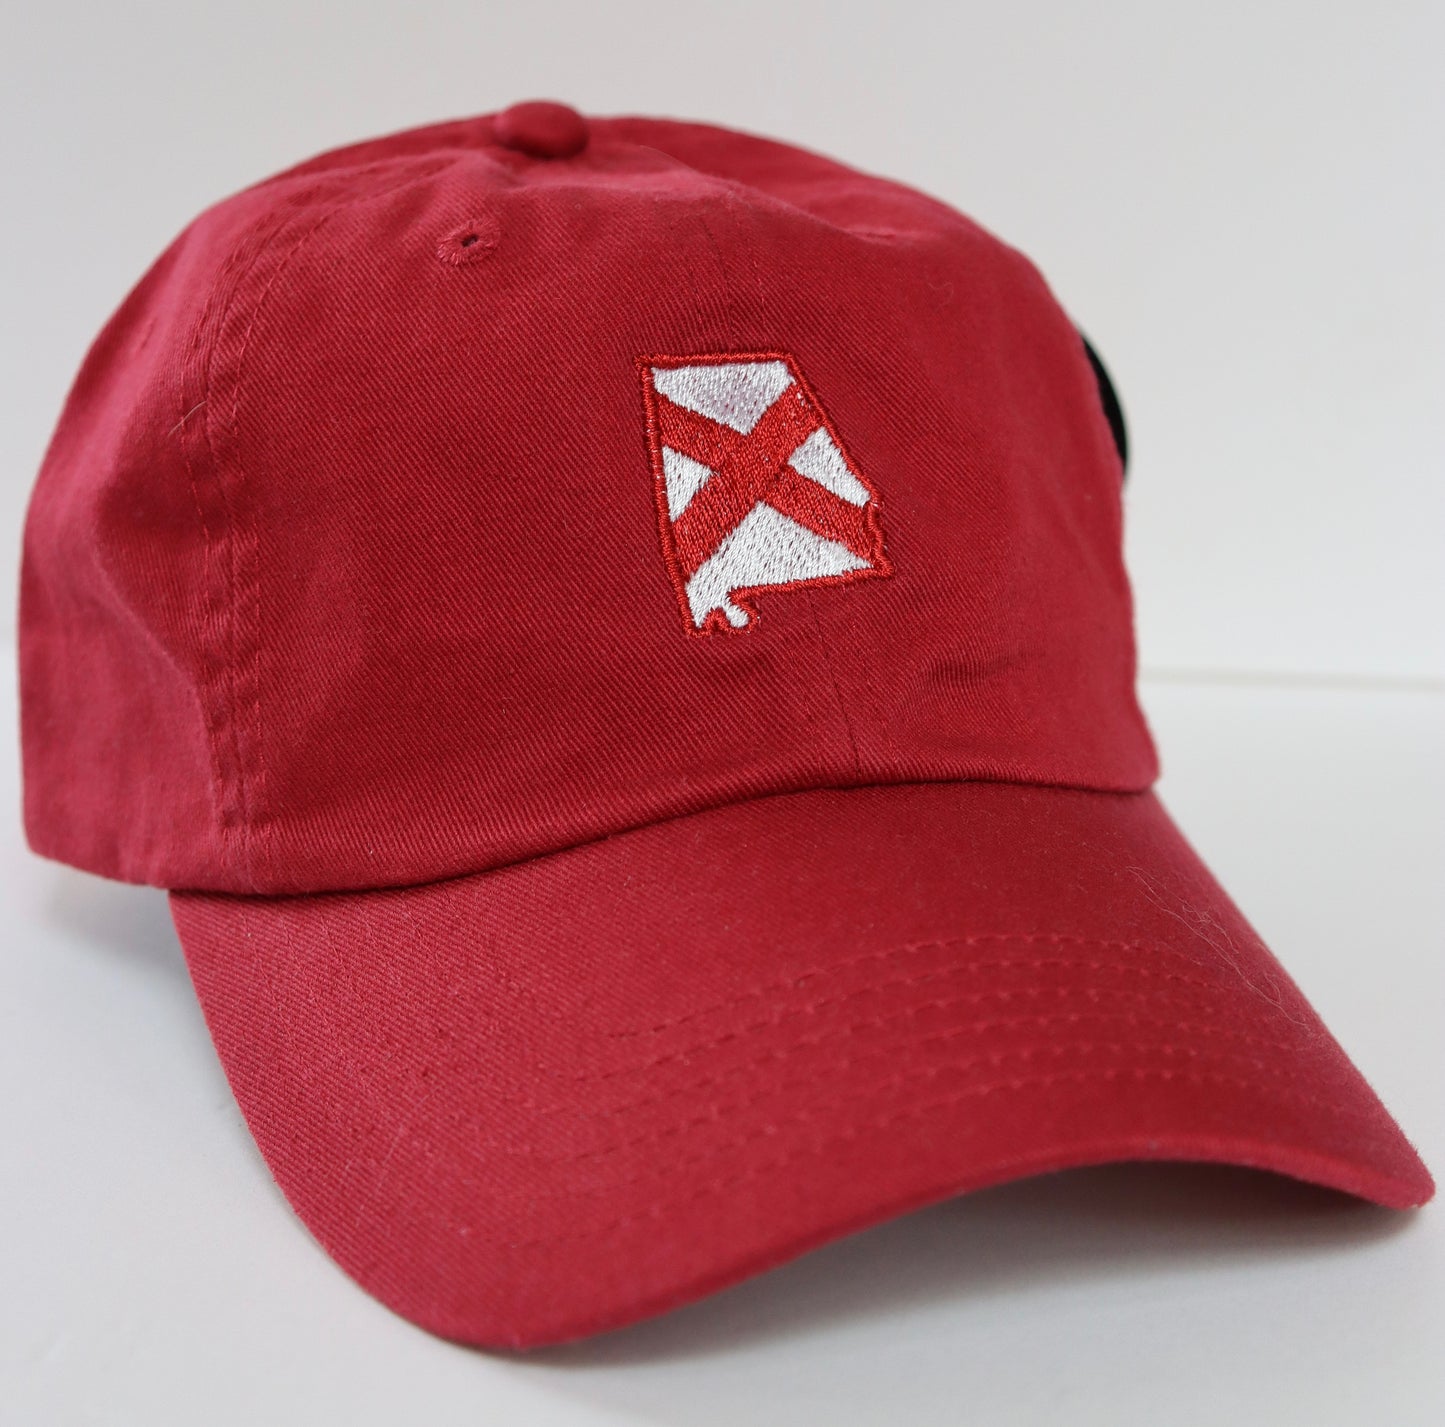 The Shirt Shop Crimson Imperial Hat - State Flag